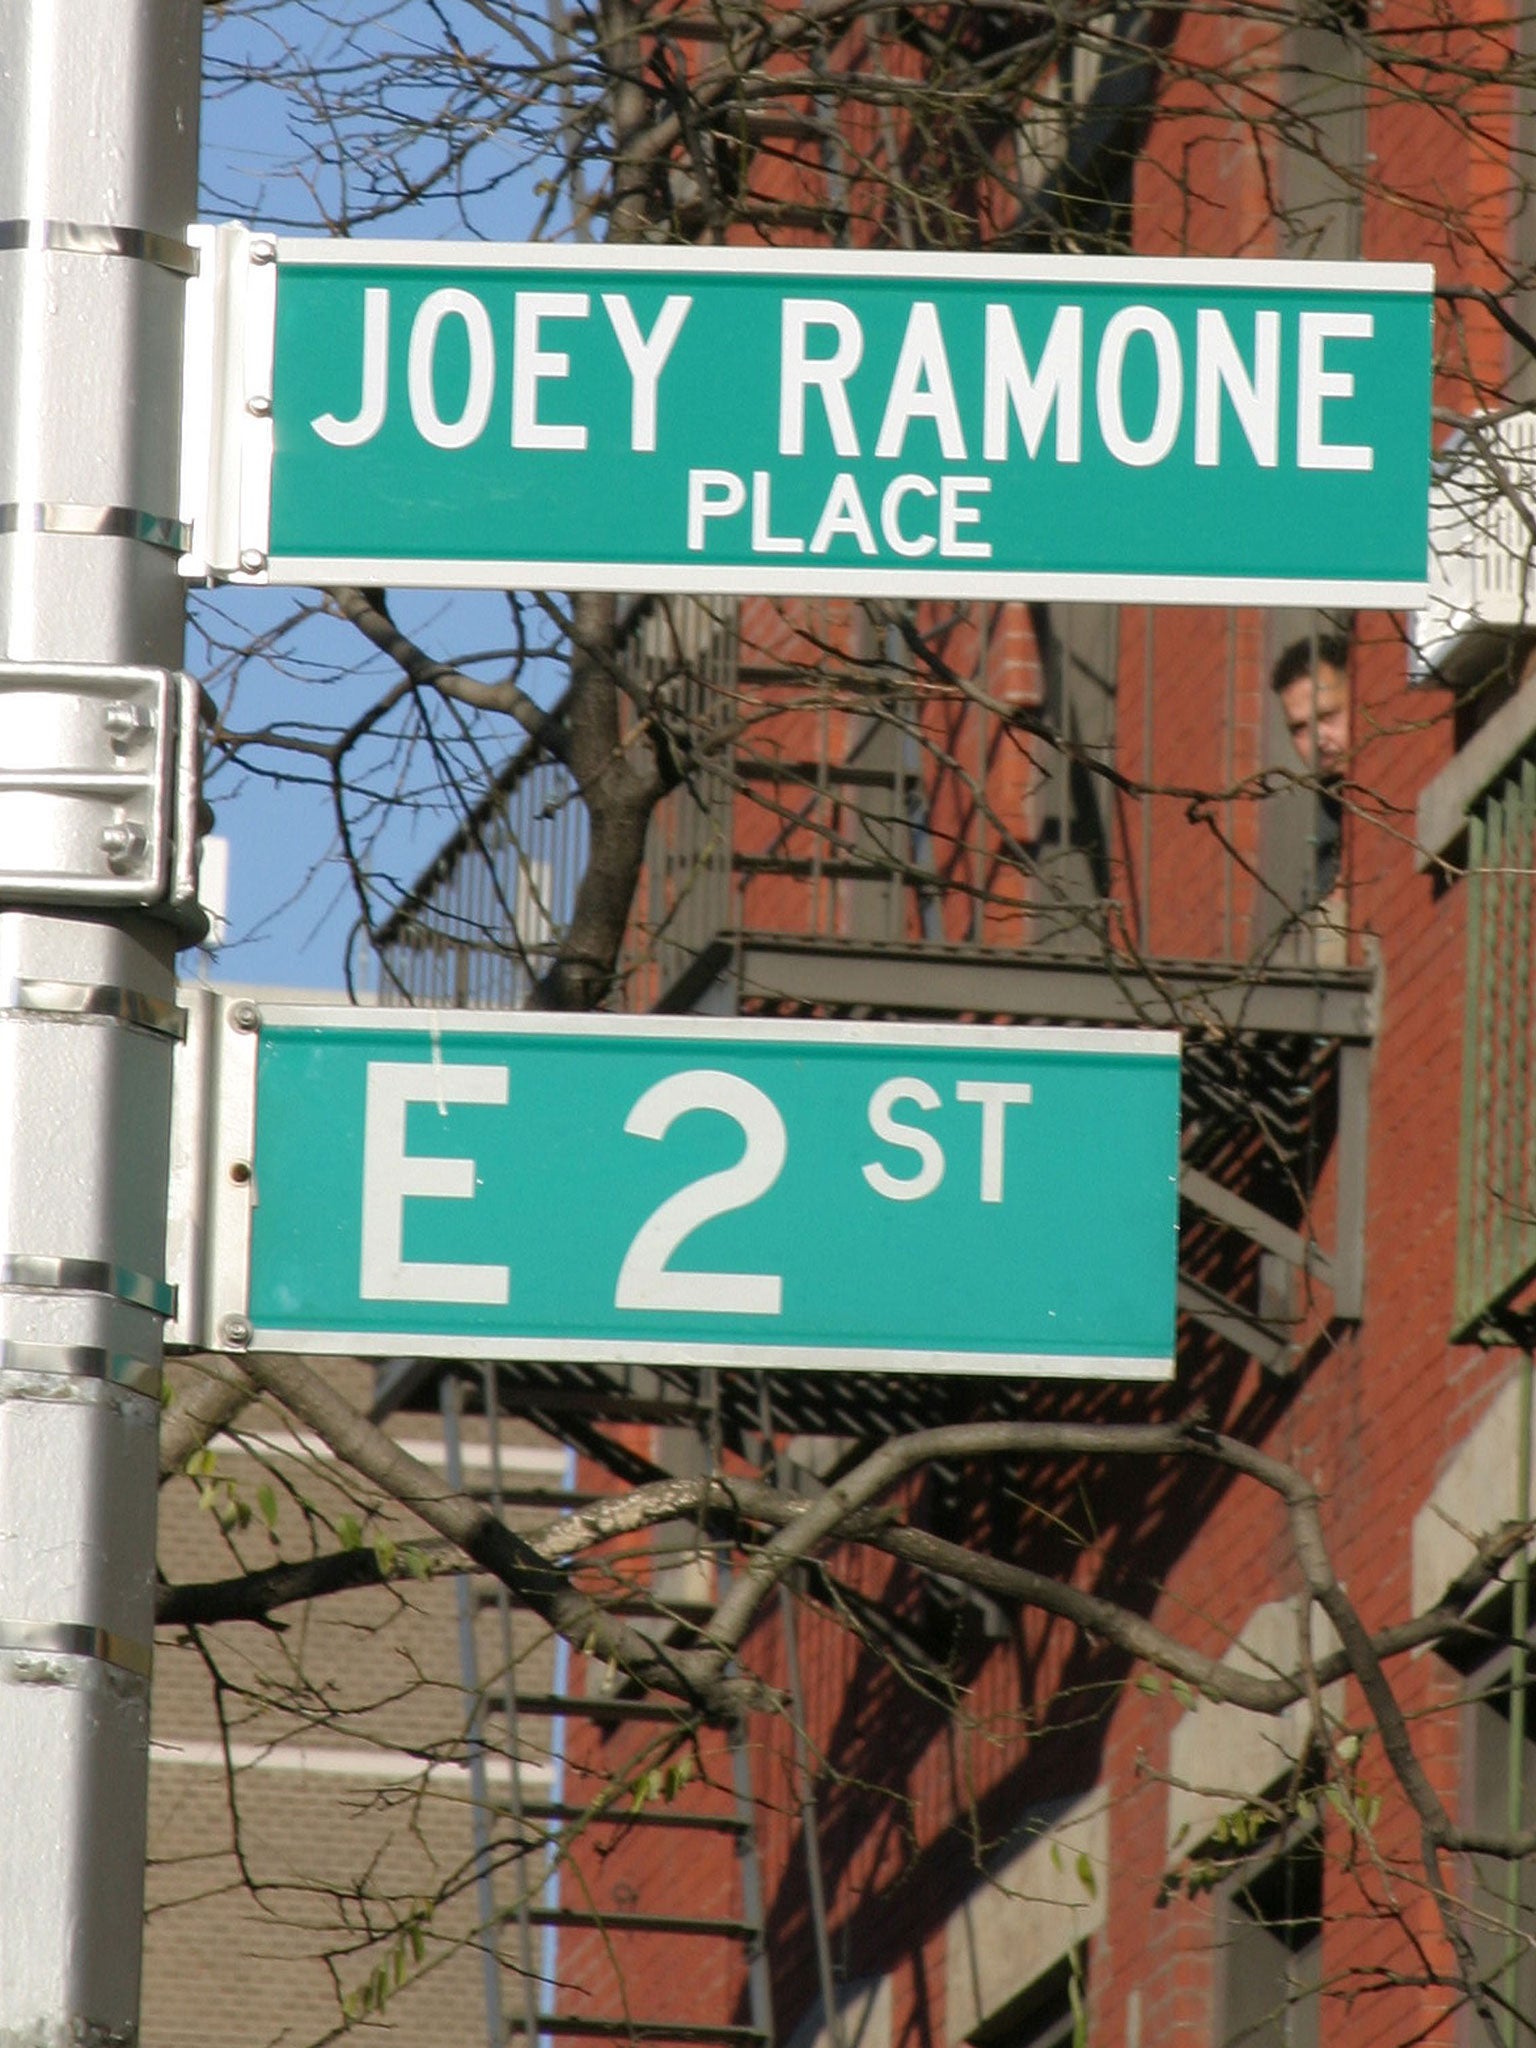 The junction of Bowery and East 2nd St is the most frequently stolen street sign in NYC